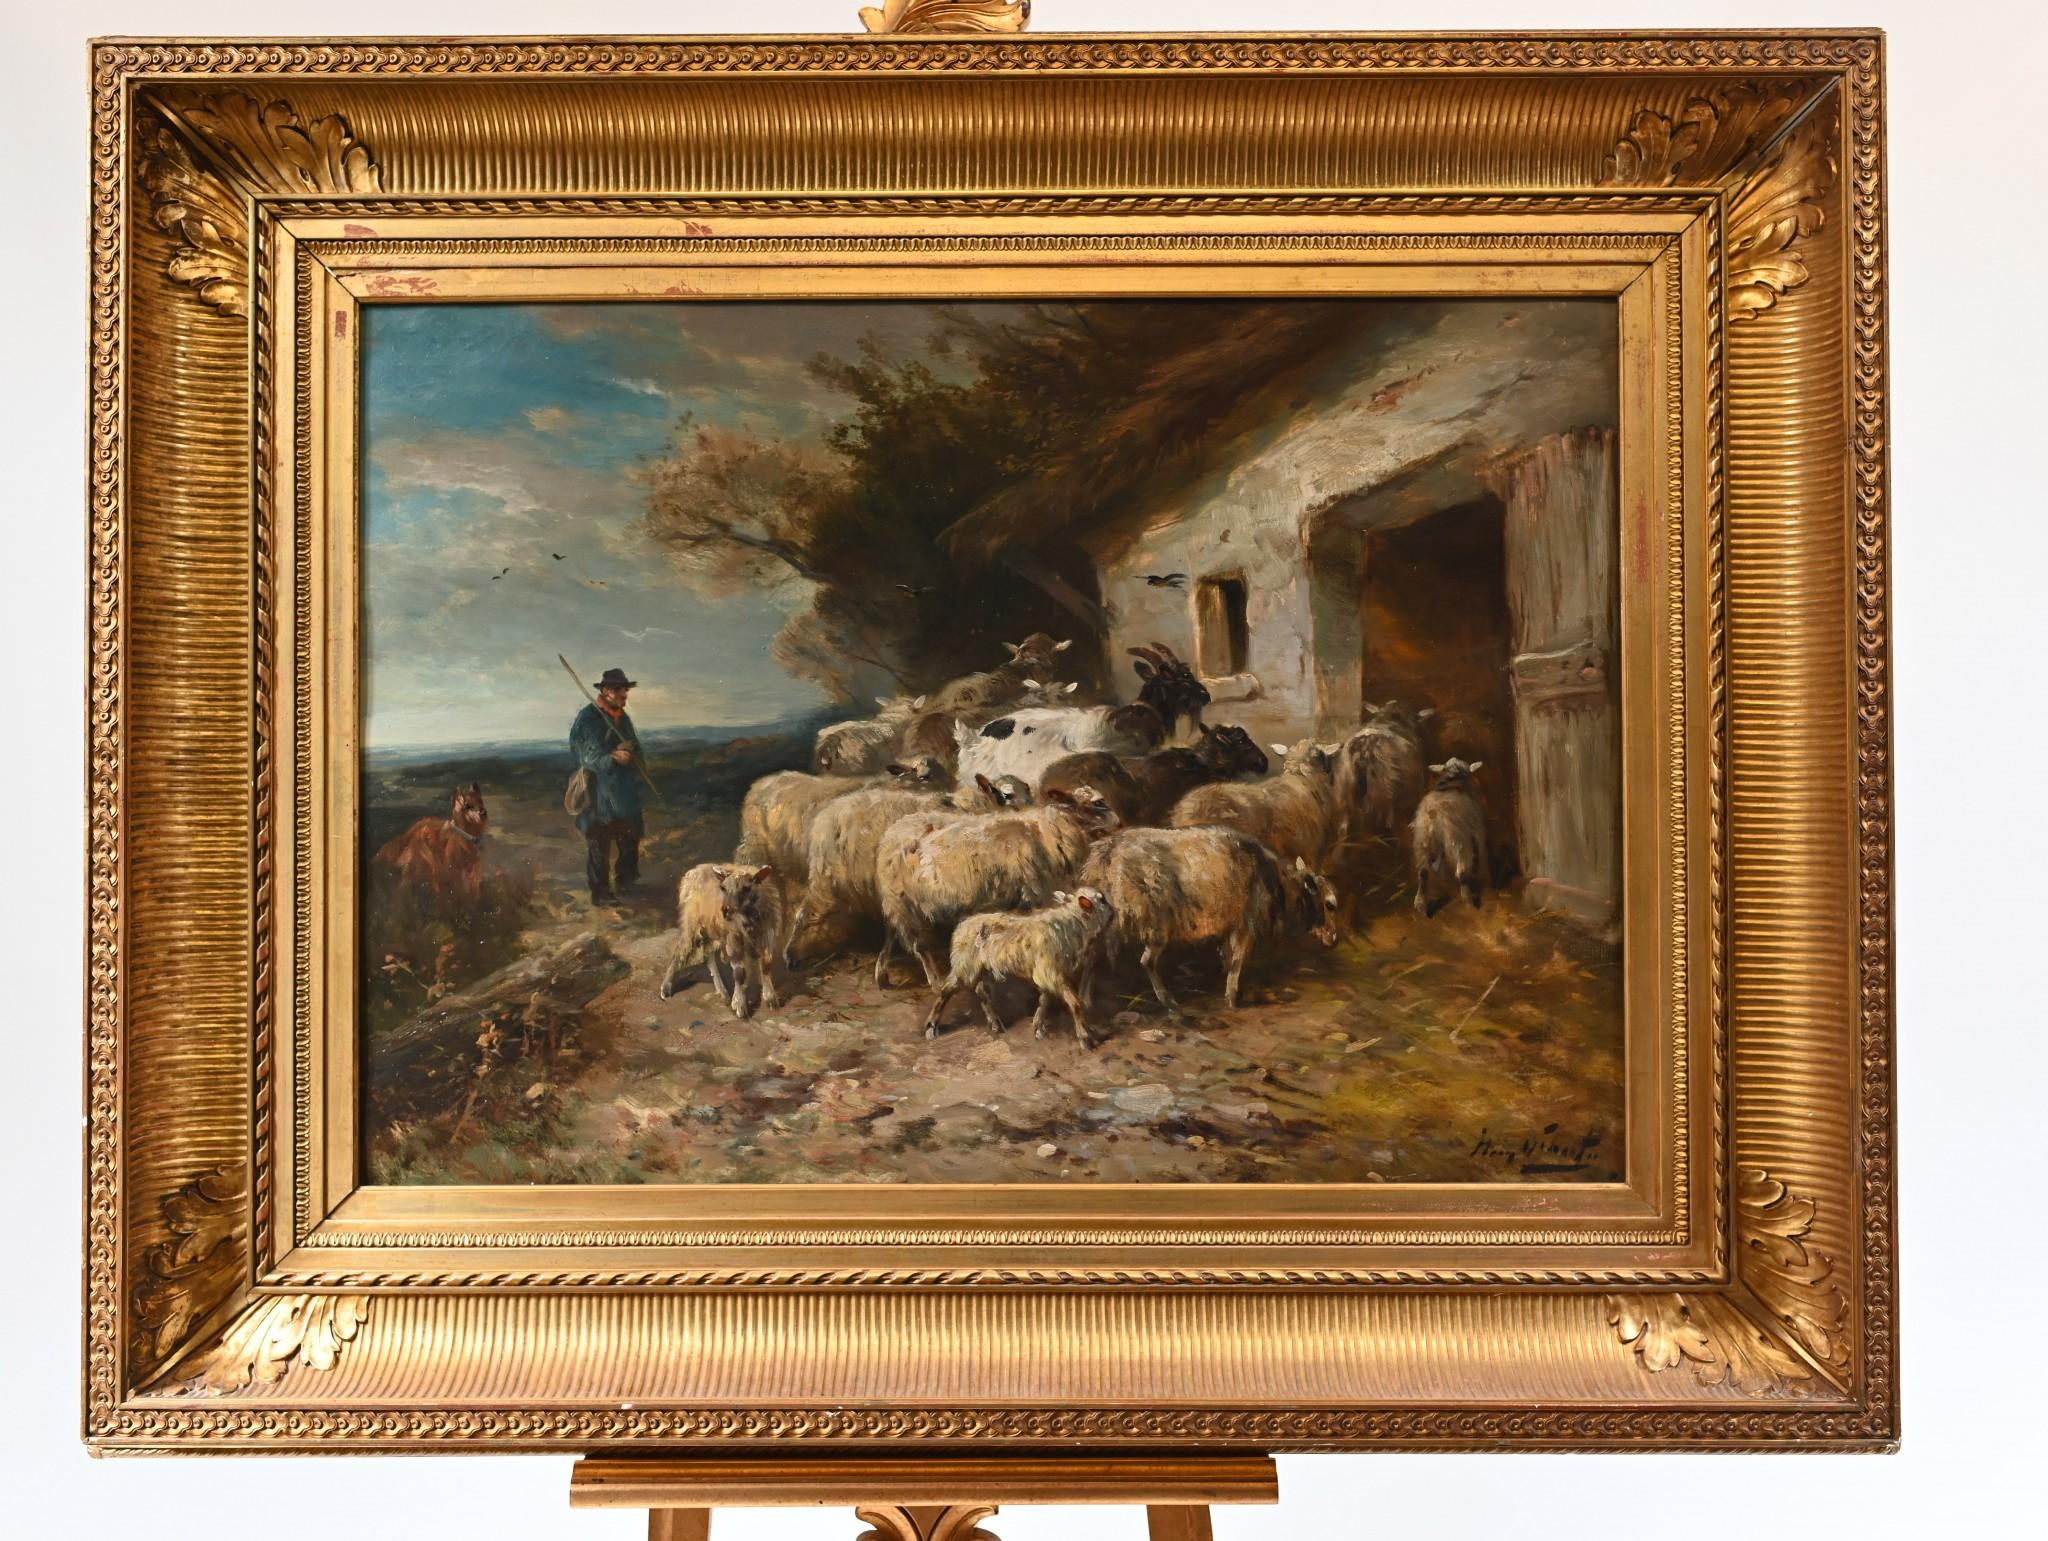 Wonderful antique oil painting of a shepherd herding his flock of sheep
Glorious work of art is by Belgium artist Henry Schouten 1857-1927
We date this piece to circa 1890 
Great work of art by a collectable artist
Very detailed, the quality to